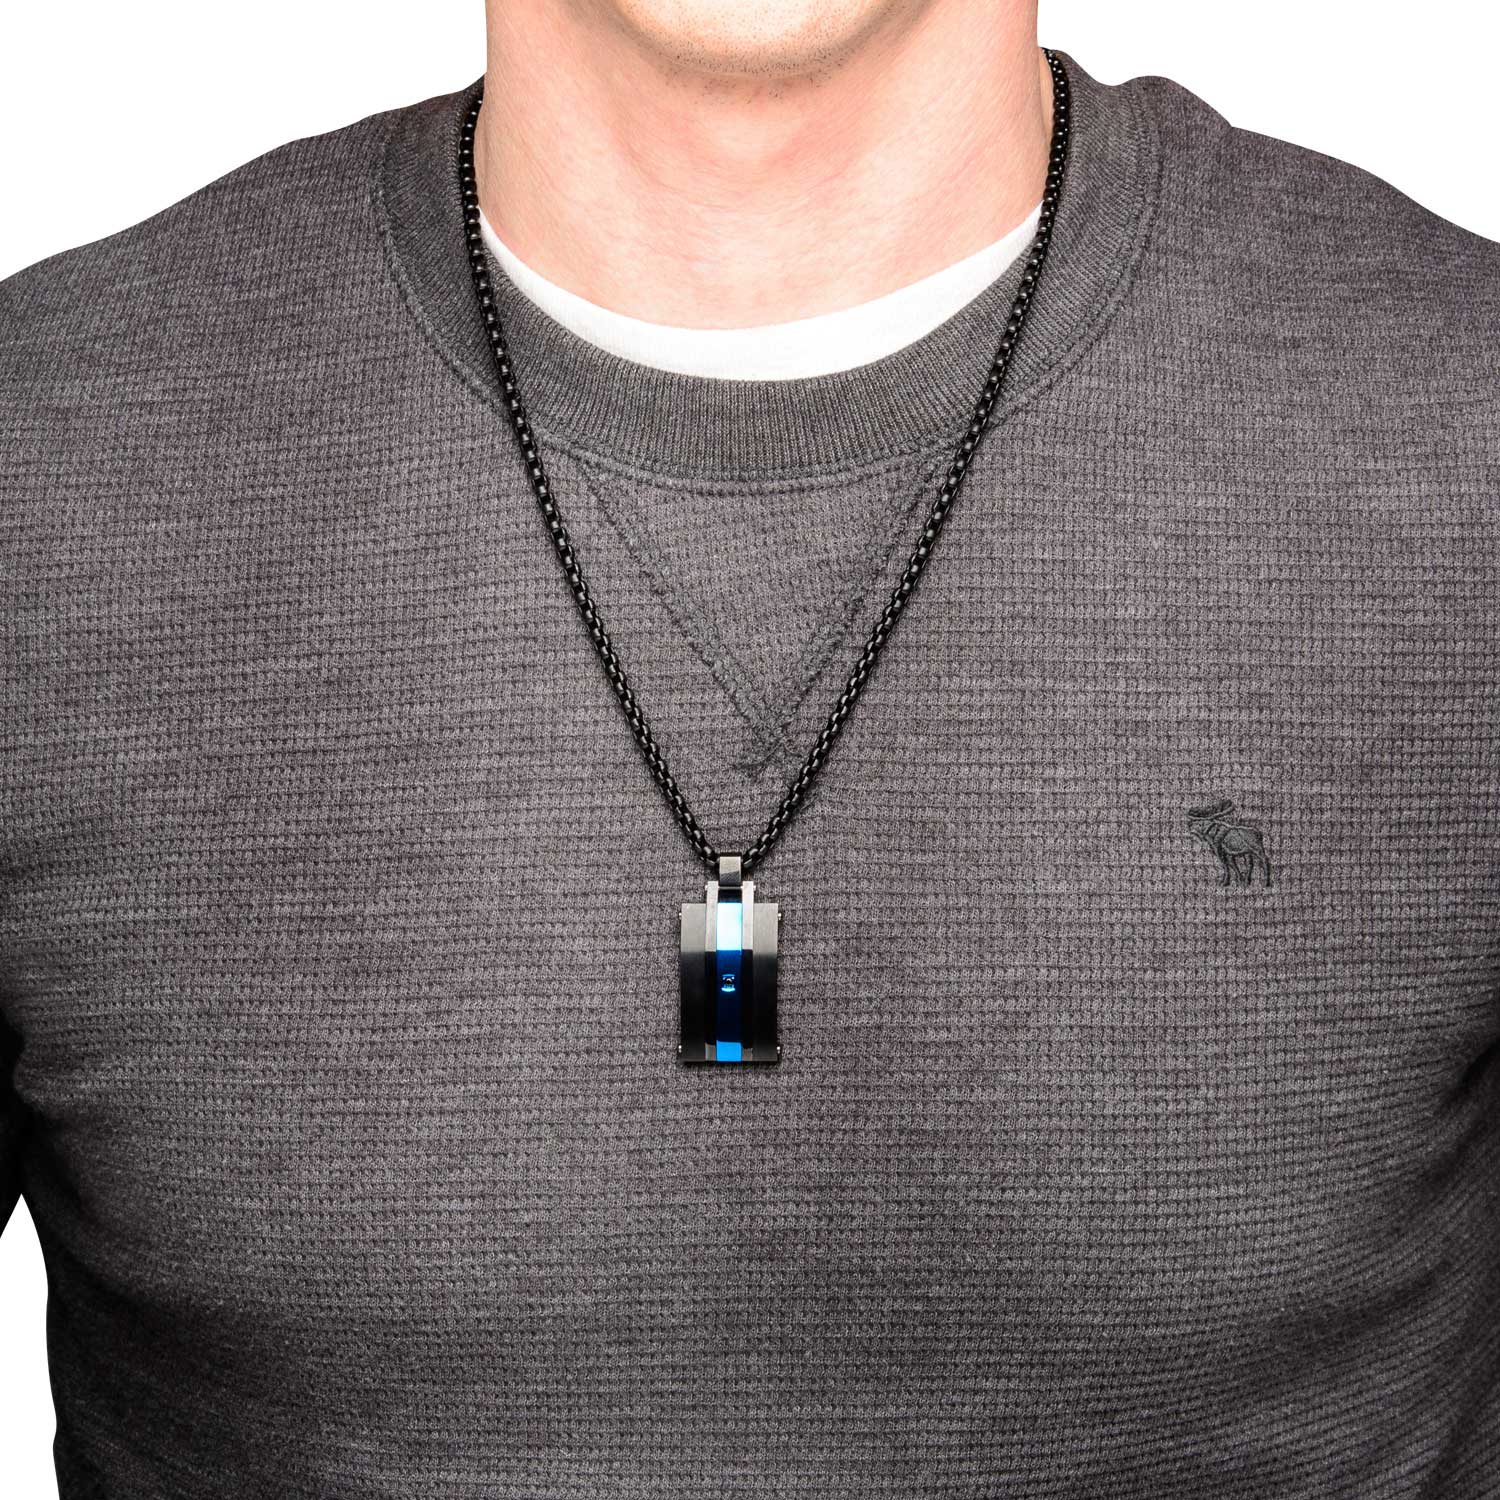 Matte Finished Black & Blue Plated with Black CZ Pendant with Chain Image 4 Ken Walker Jewelers Gig Harbor, WA